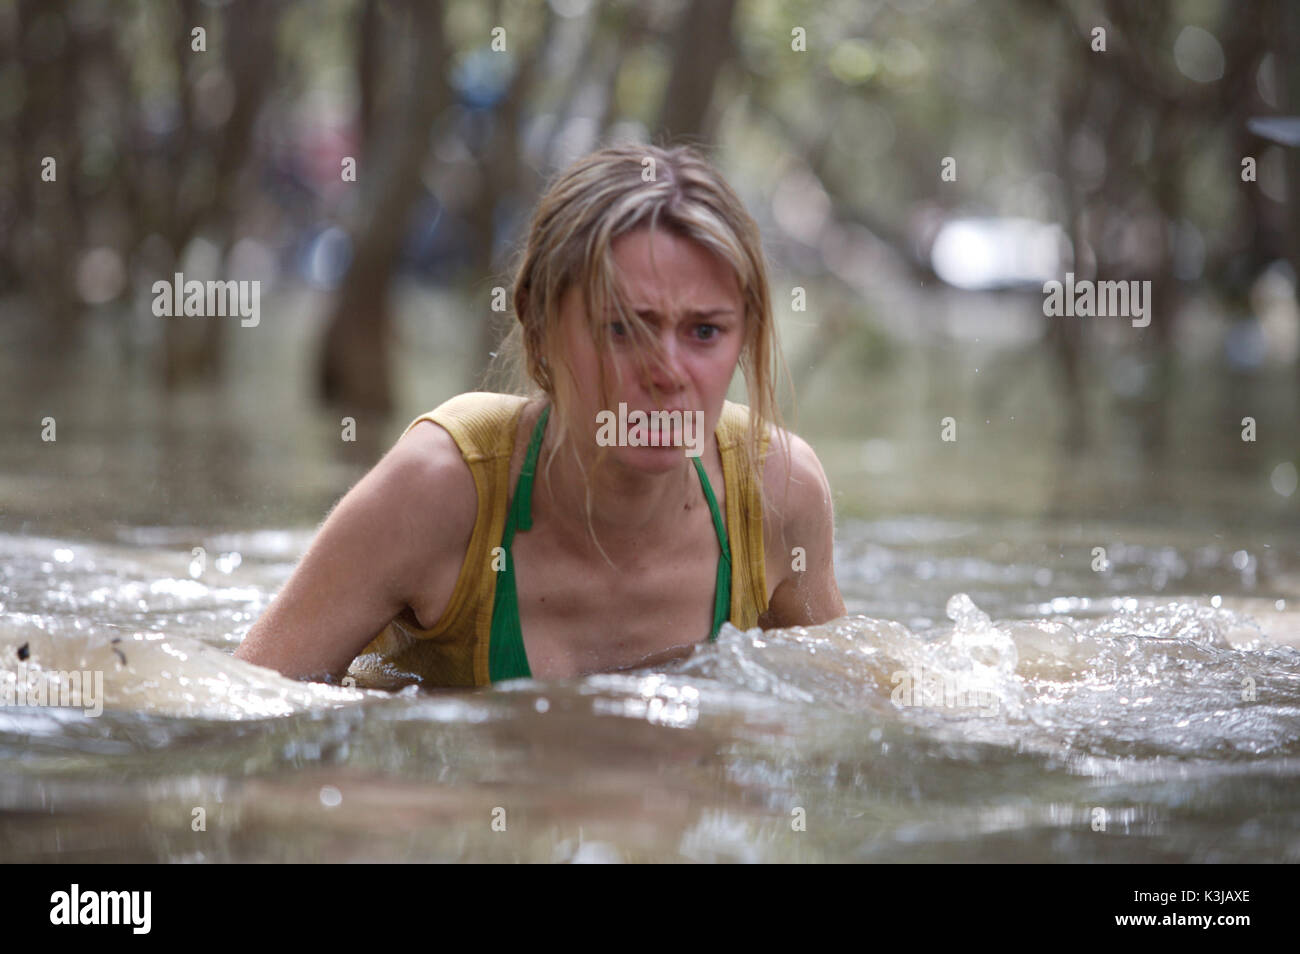 Maeve Dermody High Resolution Stock Photography and Images - Alamy